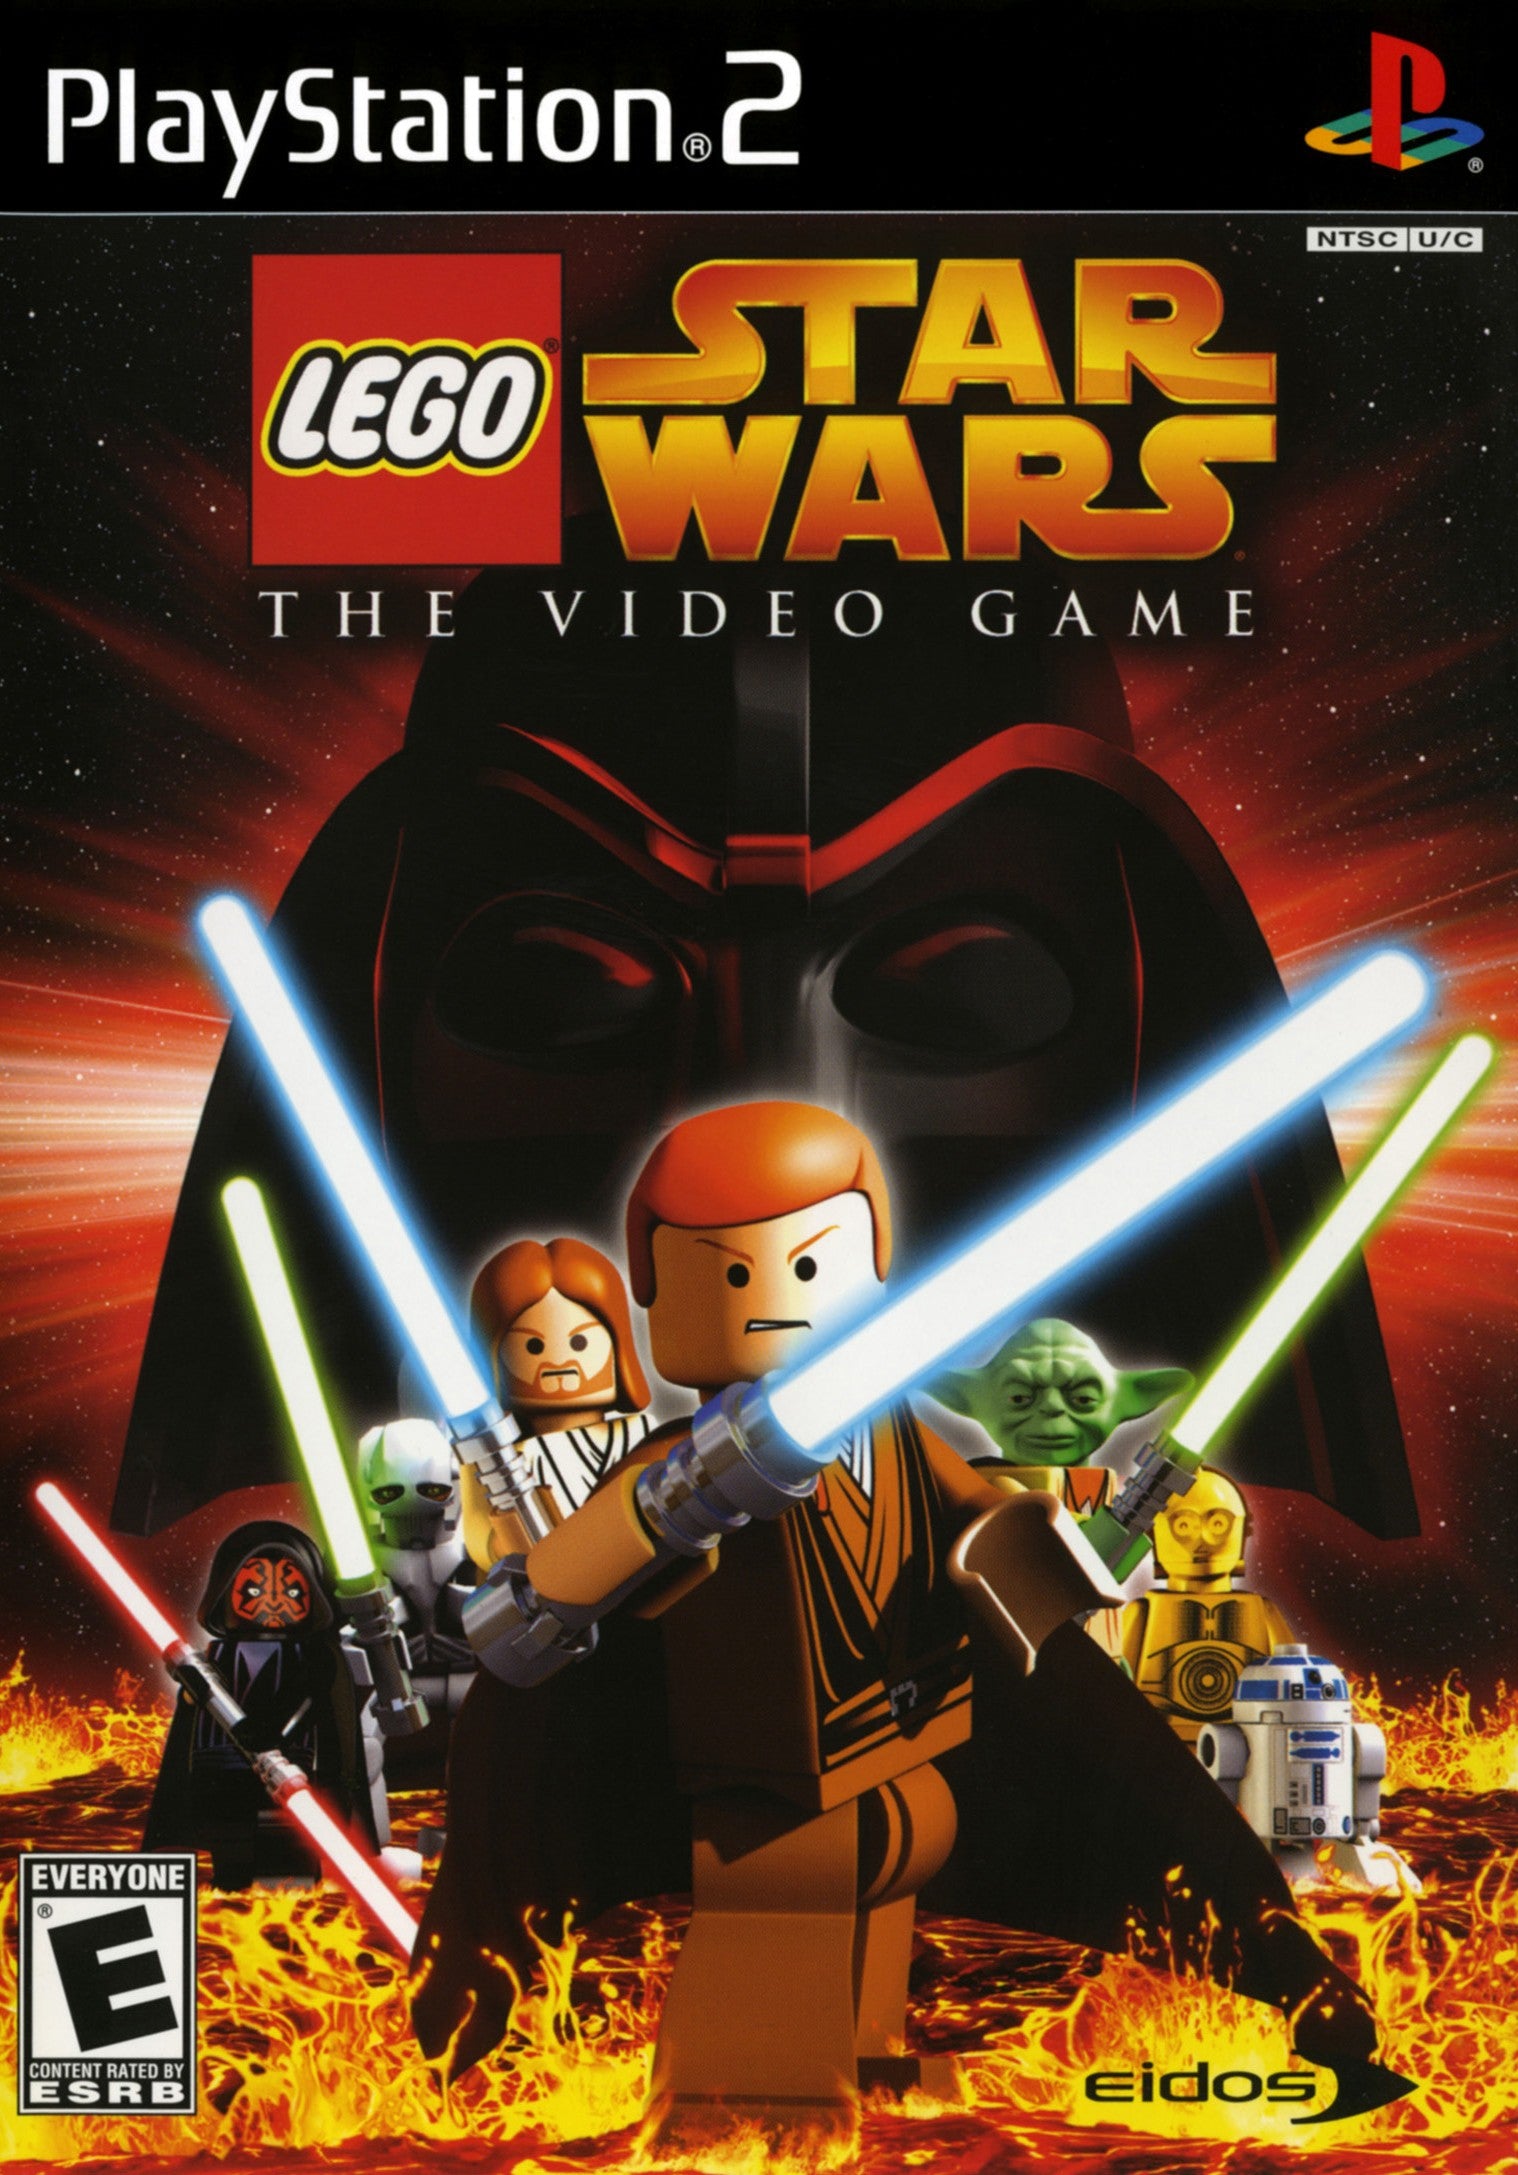 LEGO Star Wars: The Video Game - PlayStation 2 (PS2) Game - YourGamingShop.com - Buy, Sell, Trade Video Games Online. 120 Day Warranty. Satisfaction Guaranteed.